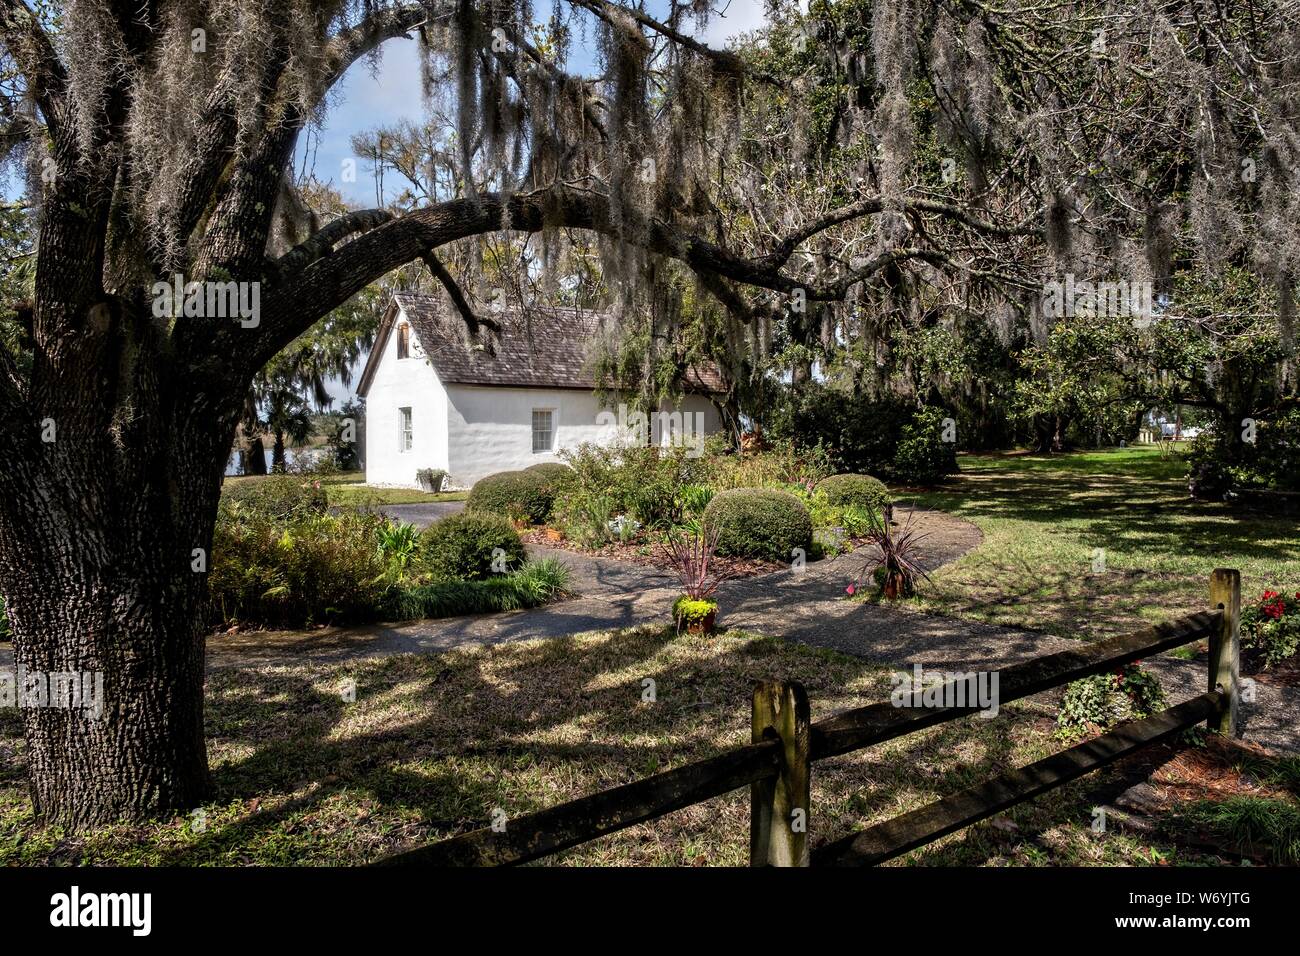 The historic Hamilton Plantation slave cabins at Gascoigne Bluff in St. Simons Island, Georgia. The cabins housed African-American slaves who worked in the cotton plantation from the early 1800’s until the early 1870’s. Stock Photo